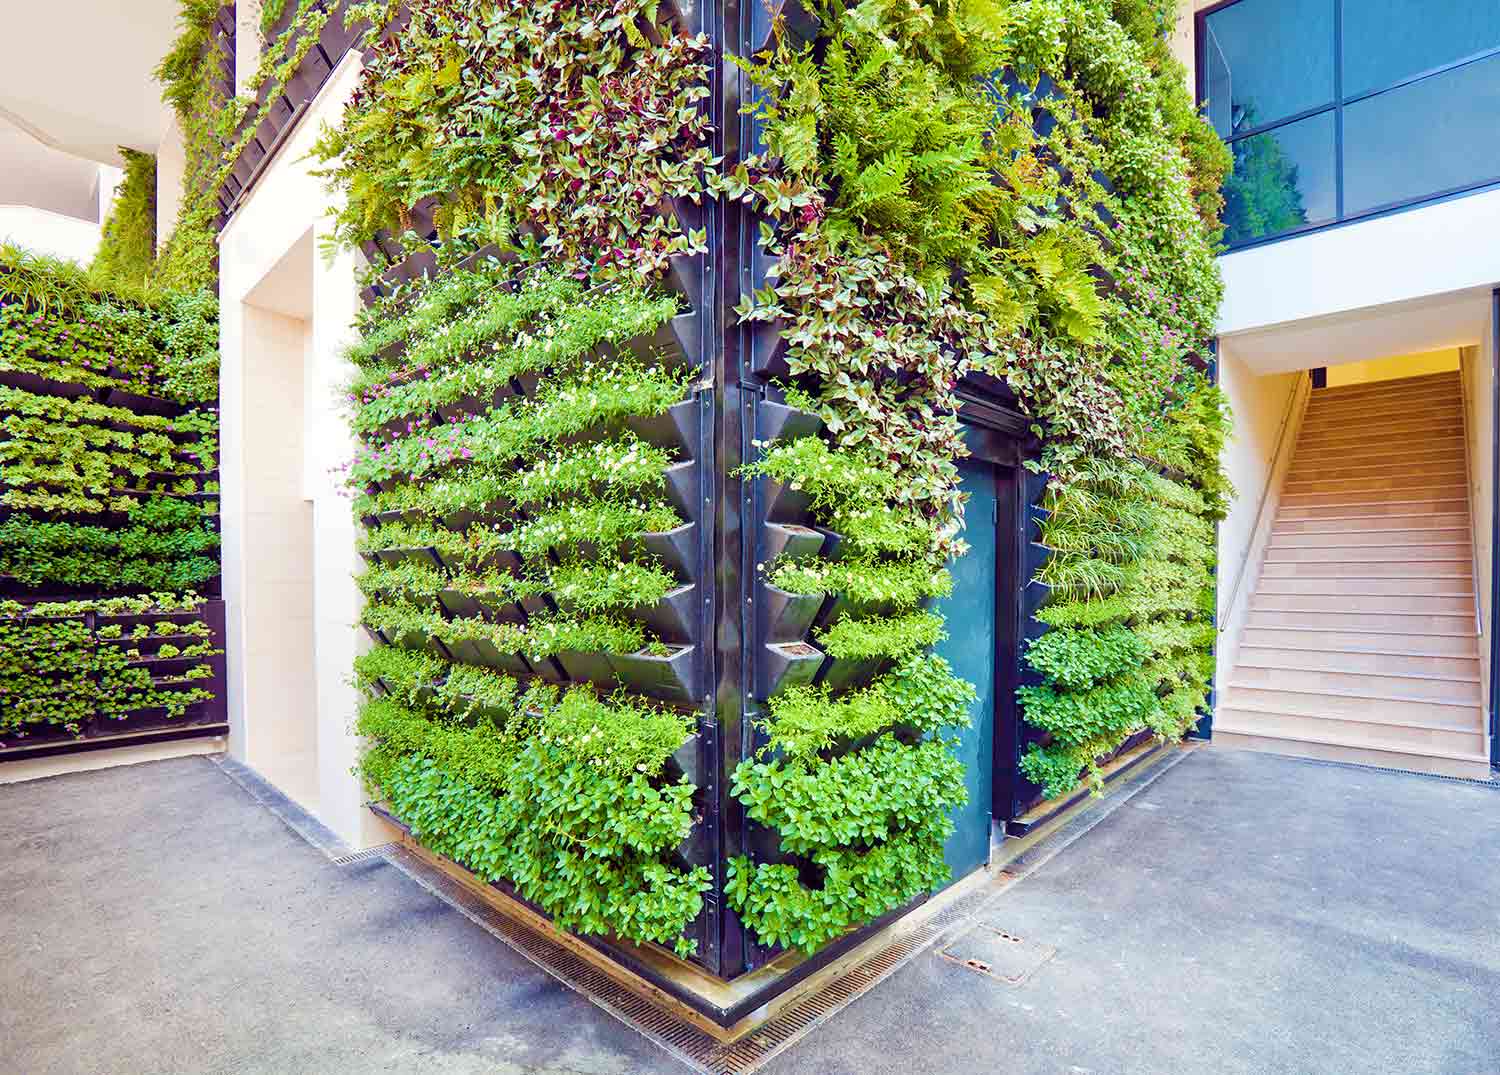 Plants growing hydroponically on a wall inside a building